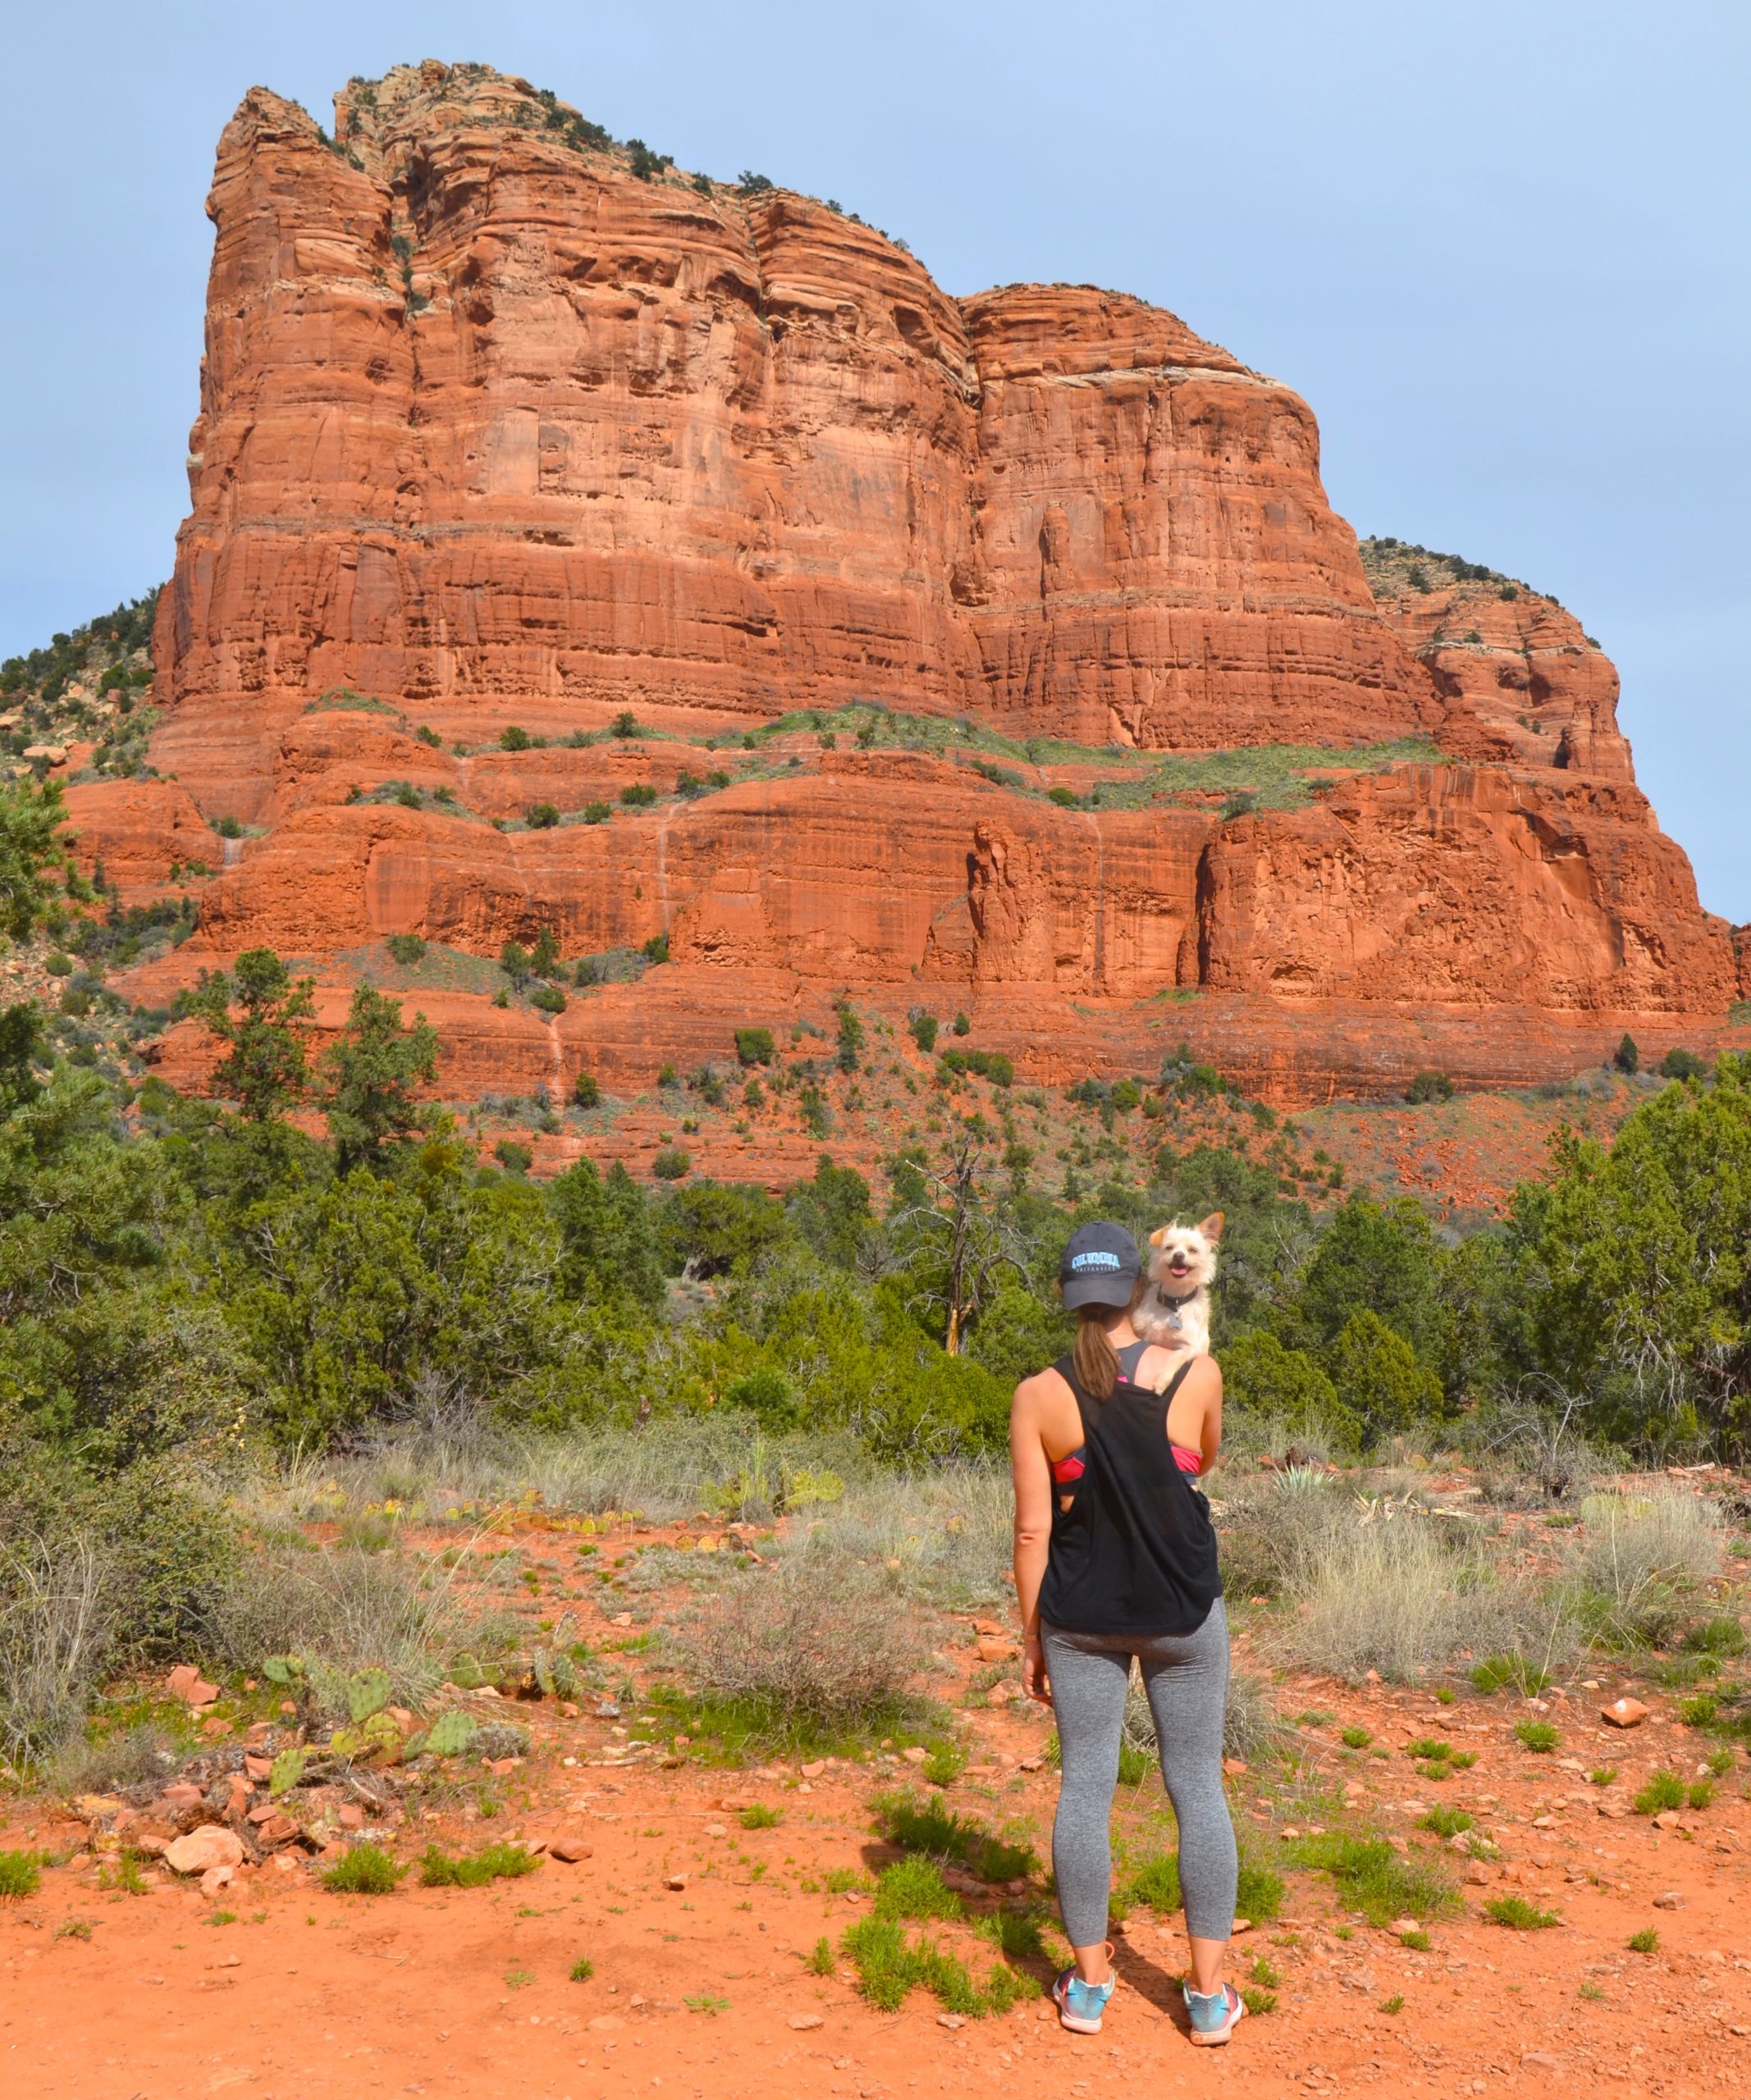 Sedona: Thoughts from a Cranky Traveler